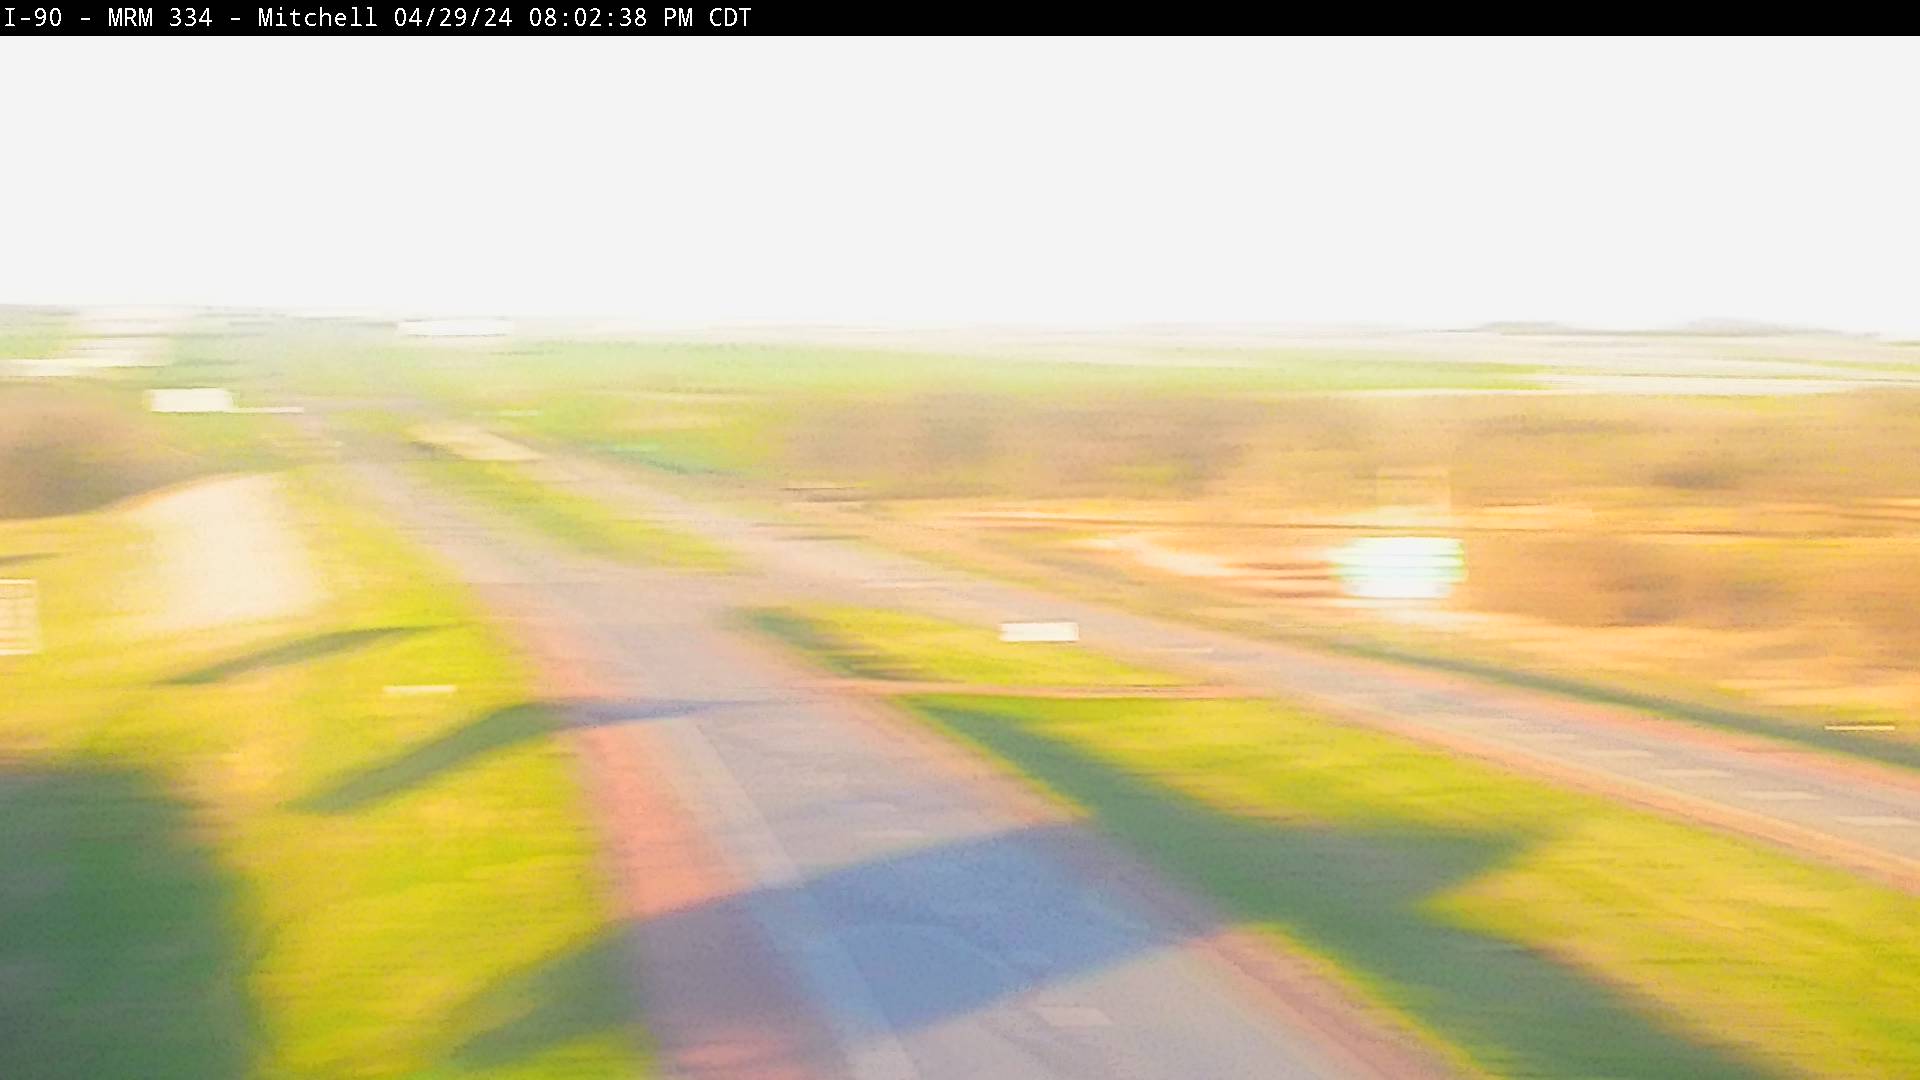 East of town along I-90 @ MP 333.8 - East Traffic Camera